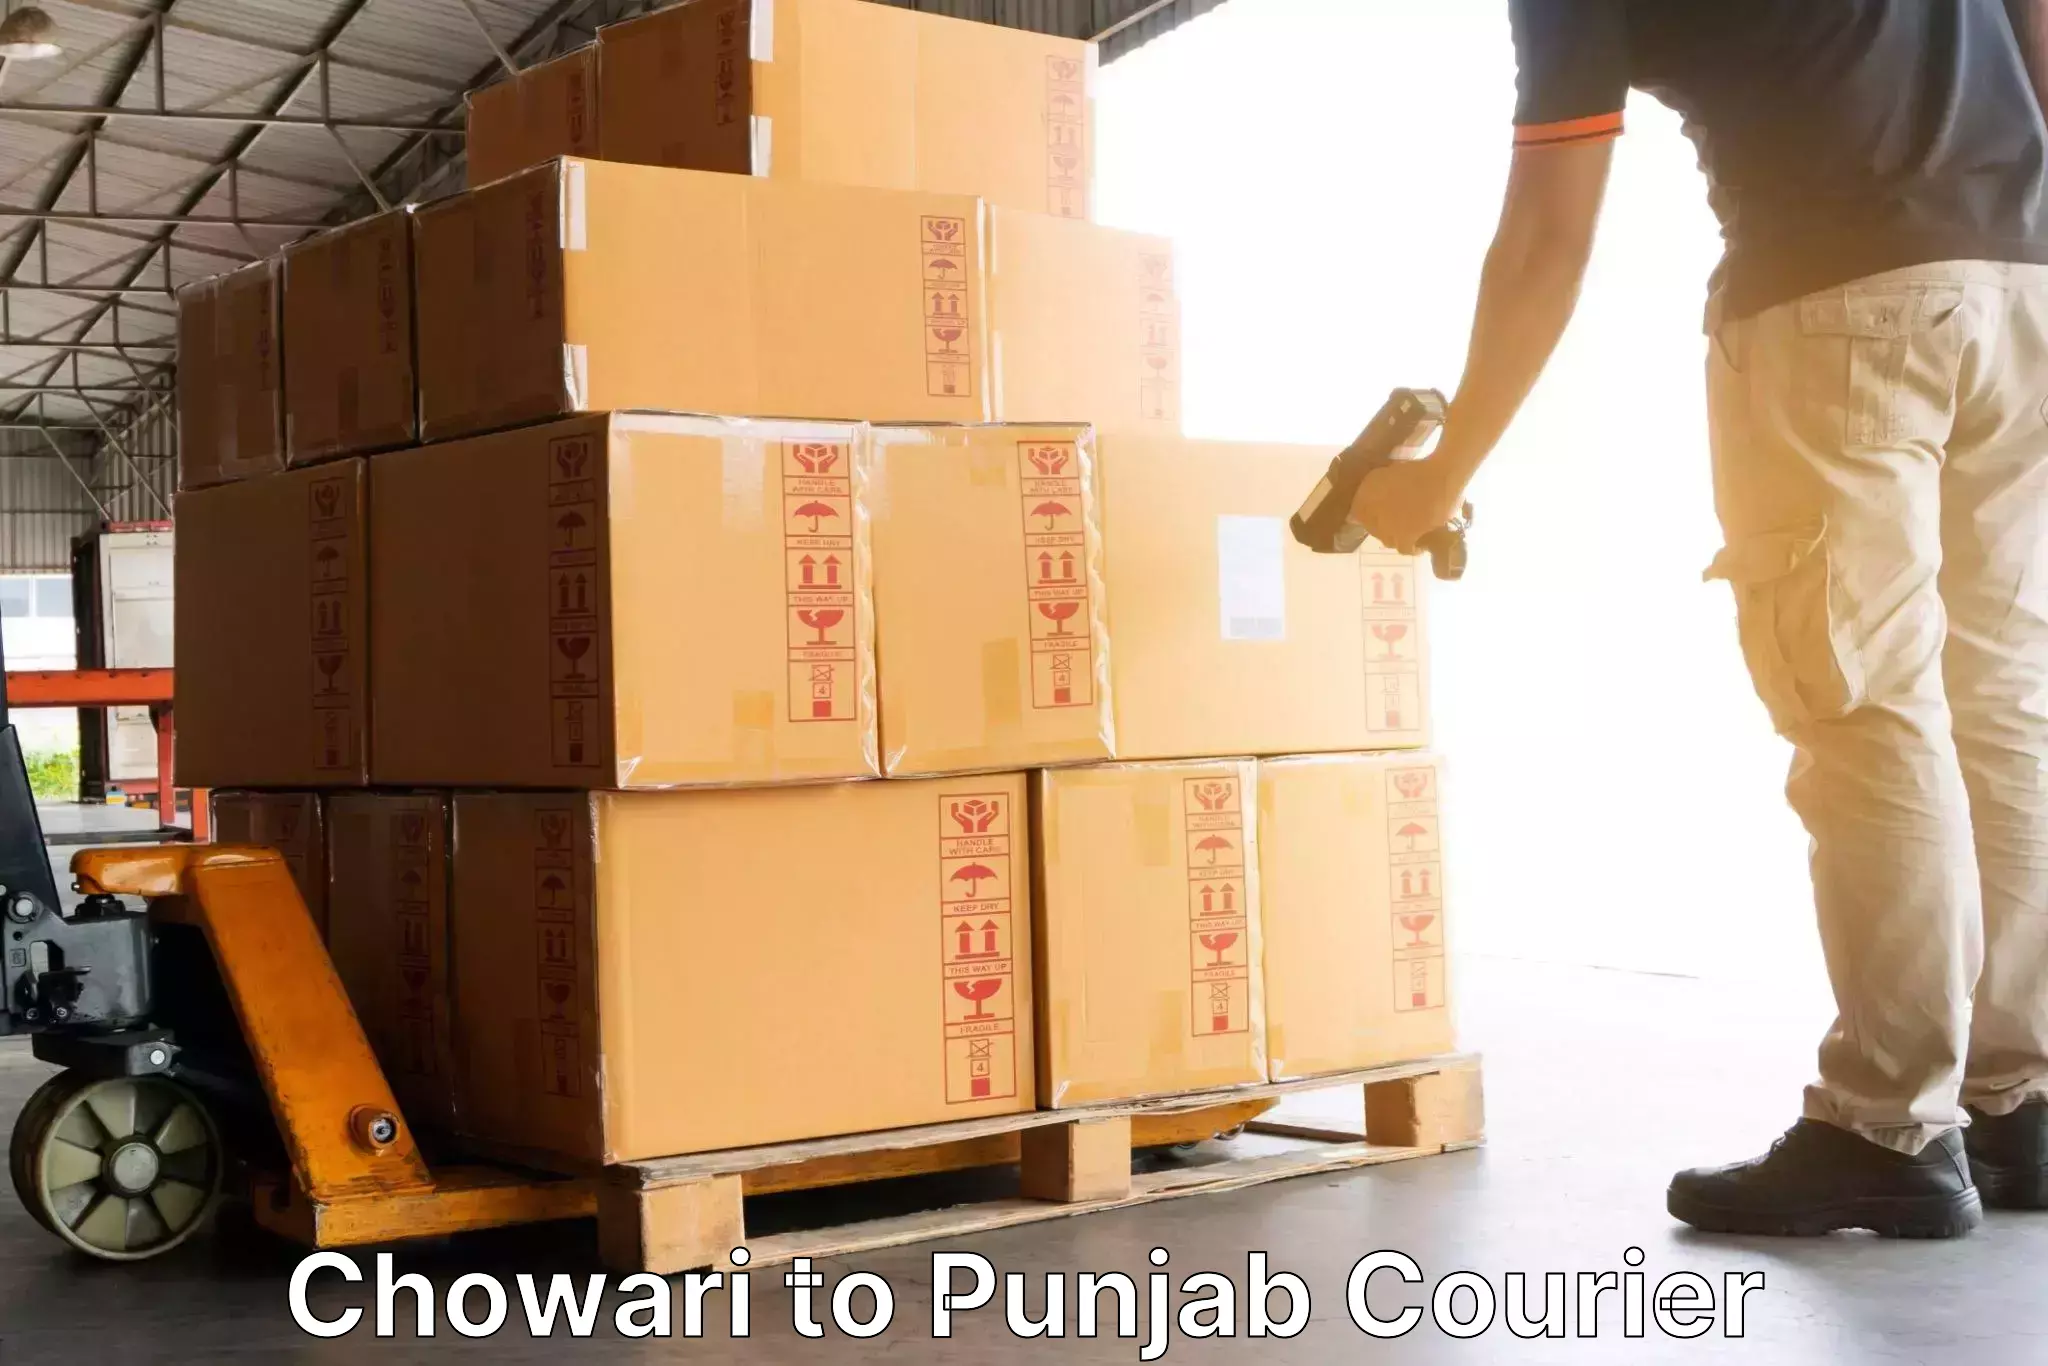 Customizable delivery plans Chowari to Punjab